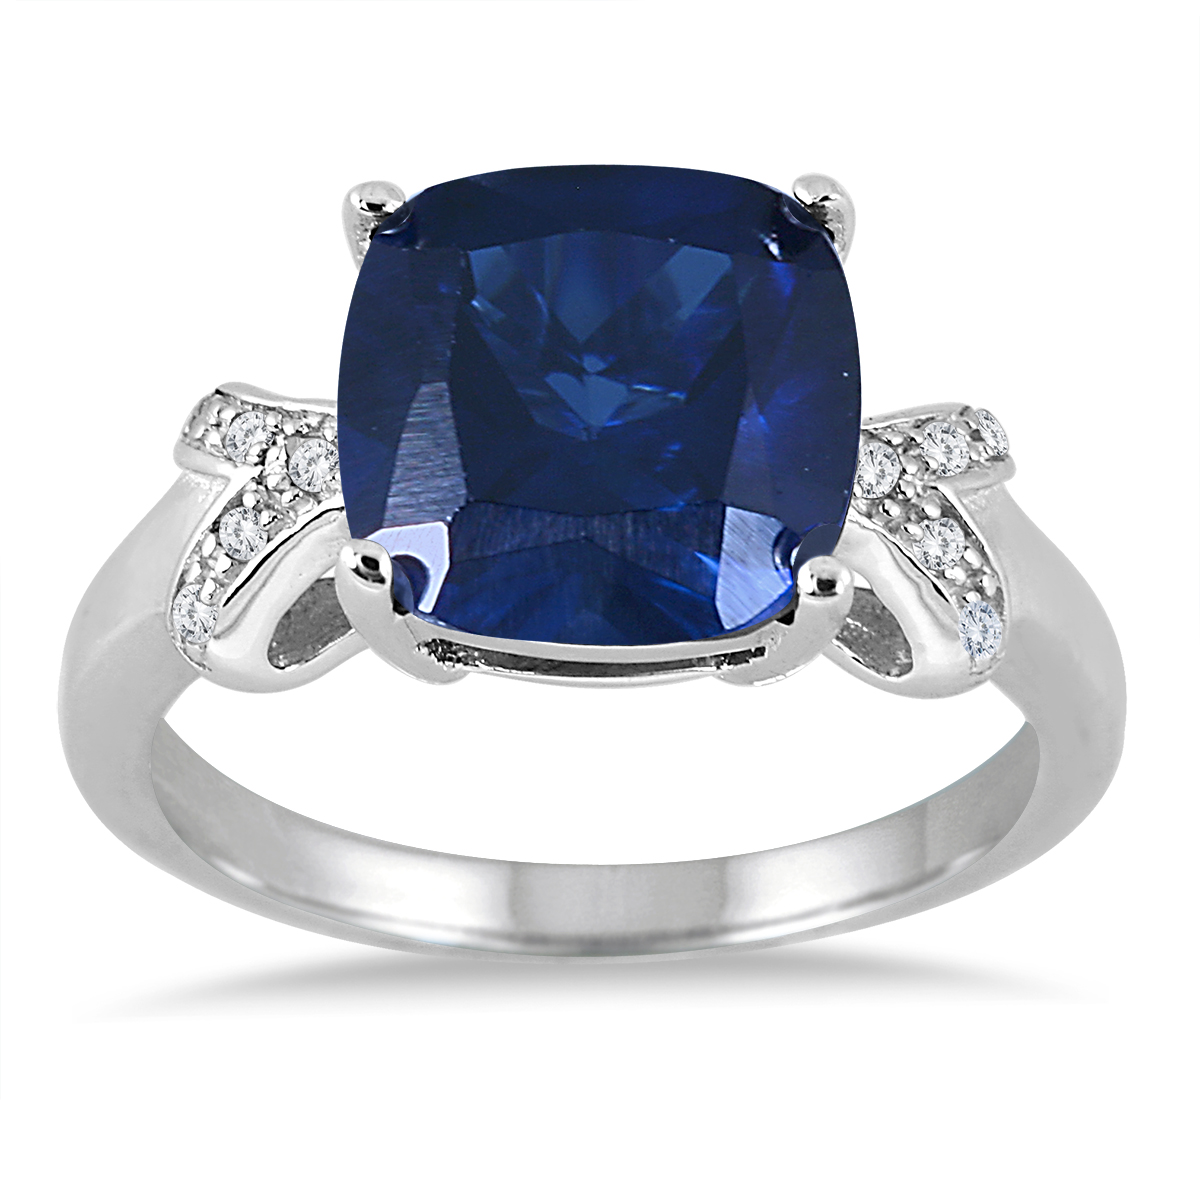 10MM Cushion Cut Created Sapphire Ring in .925 Sterling Silver